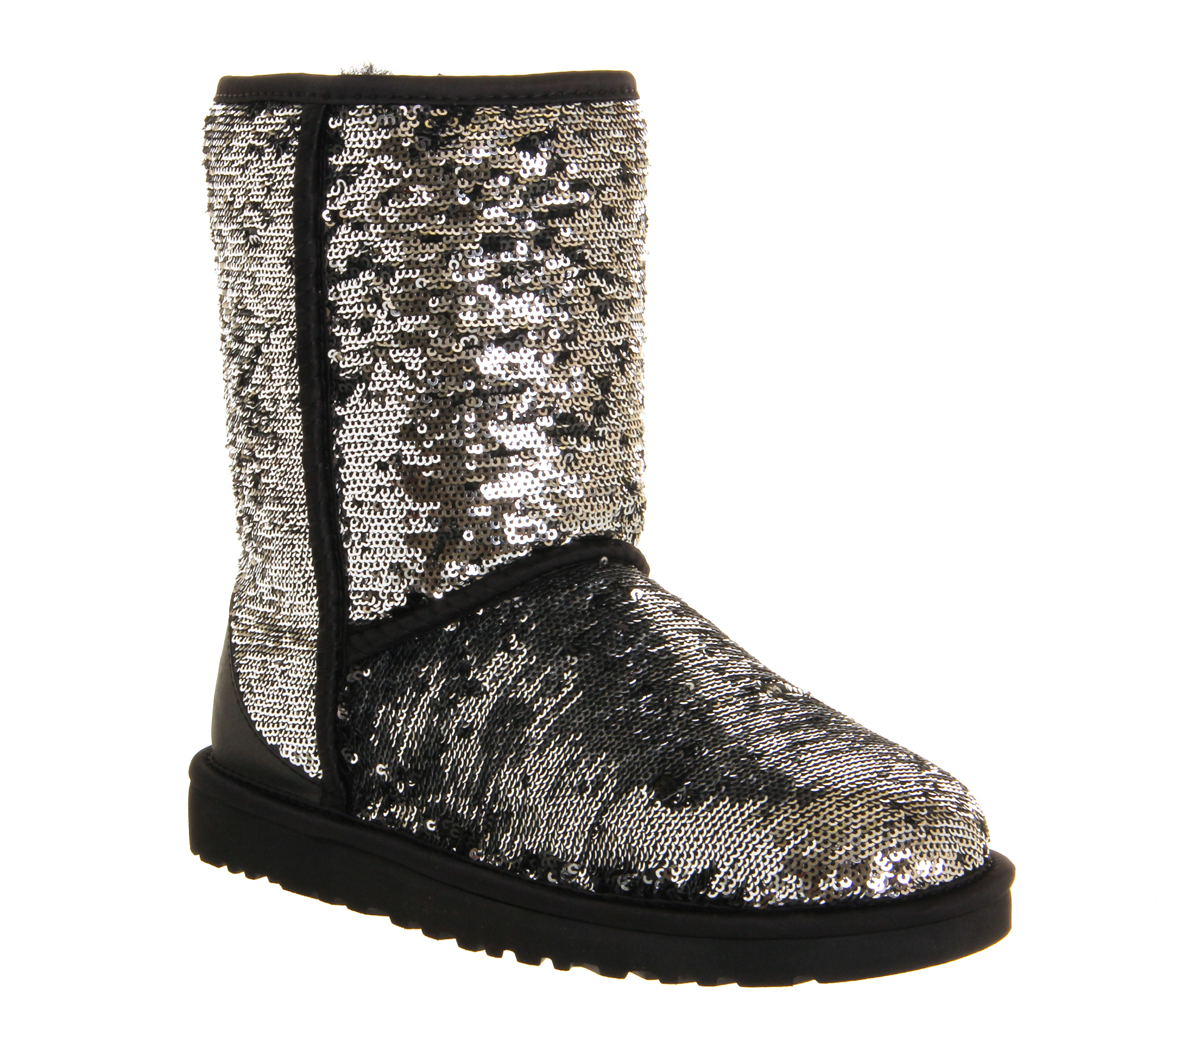 Lyst - Ugg Classic Short Sparkle Sequined Boots in Metallic